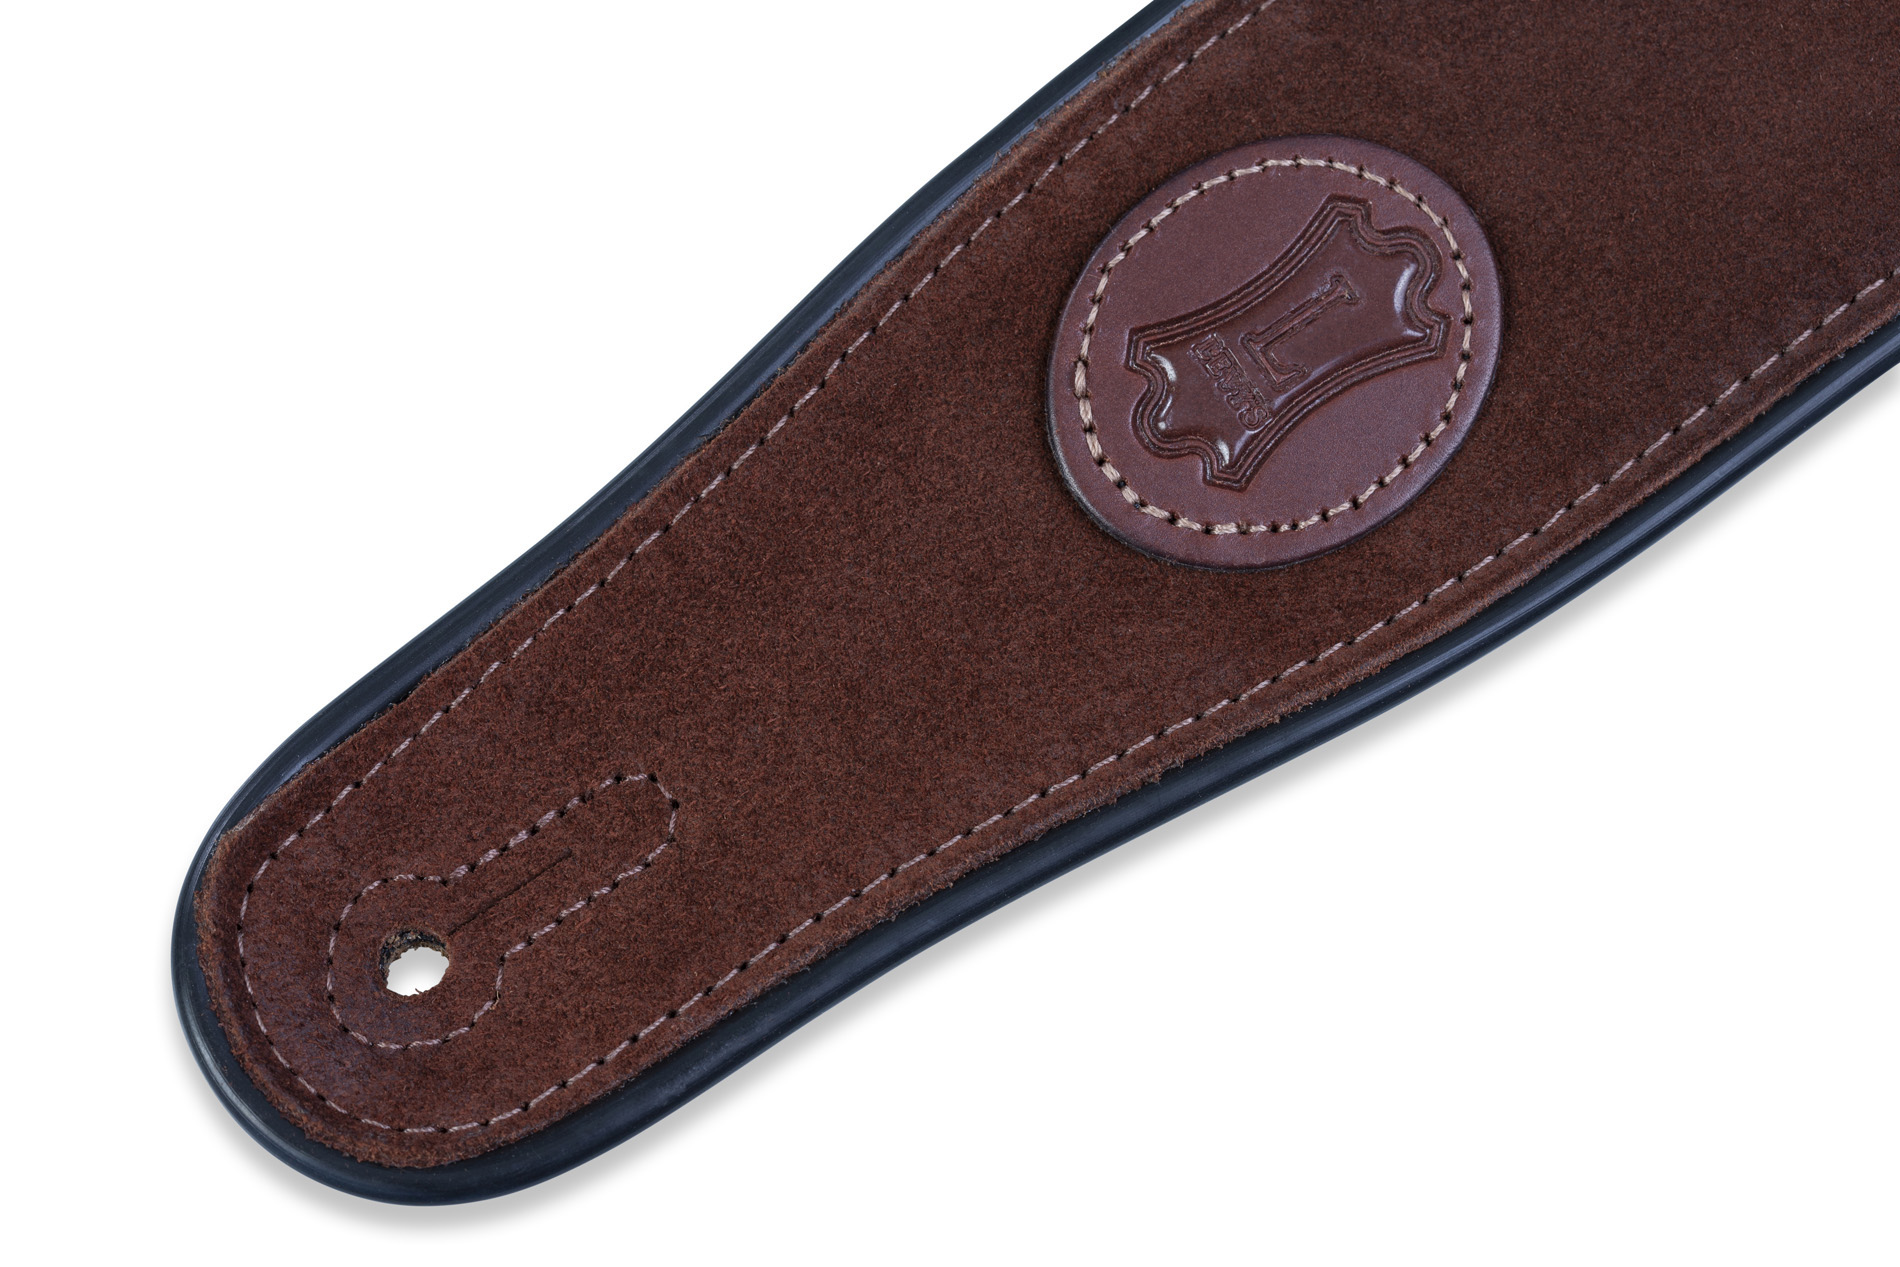 Levy's Suede Leather Sangle Daim Mss3 Brown - Guitar strap - Variation 2